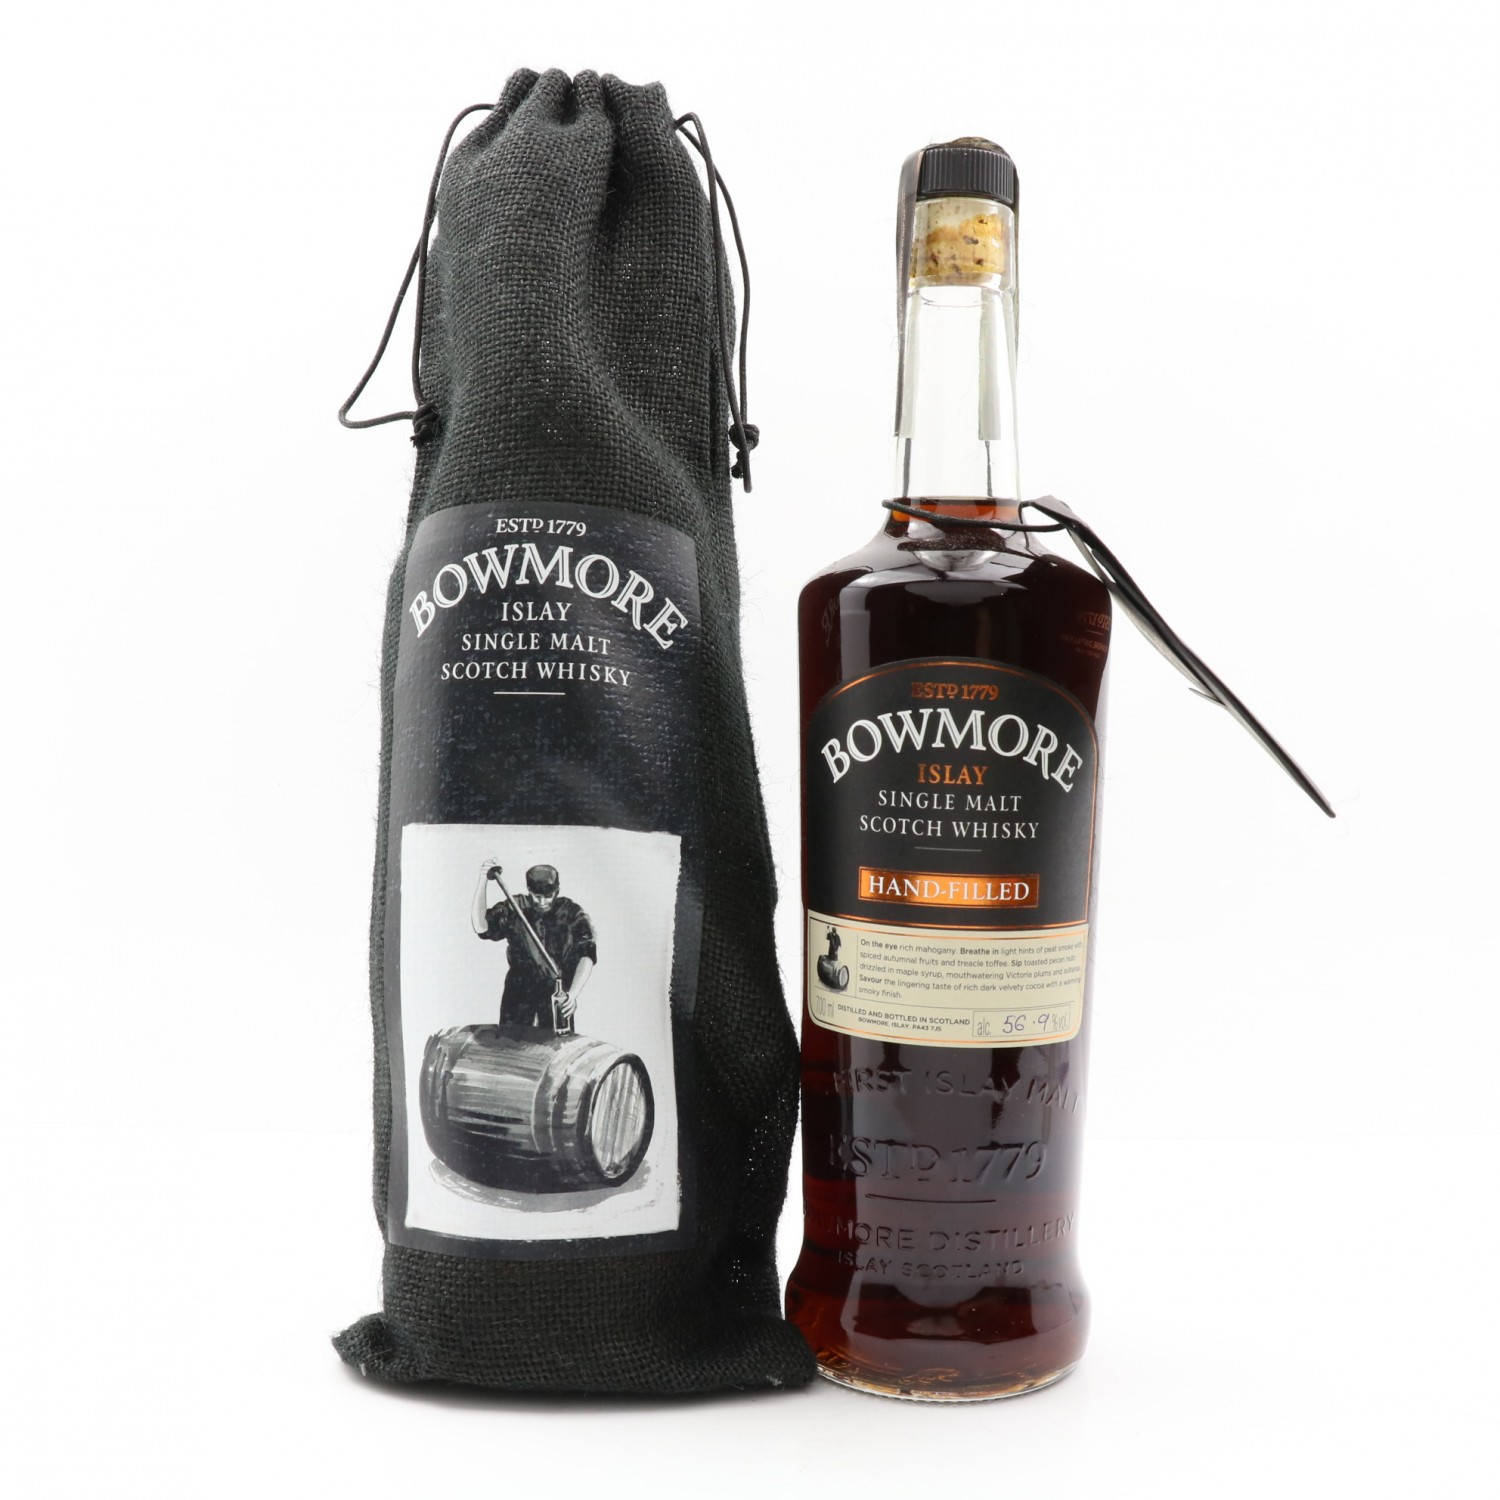 Bowmore Hand-Filled Edition Wallpaper